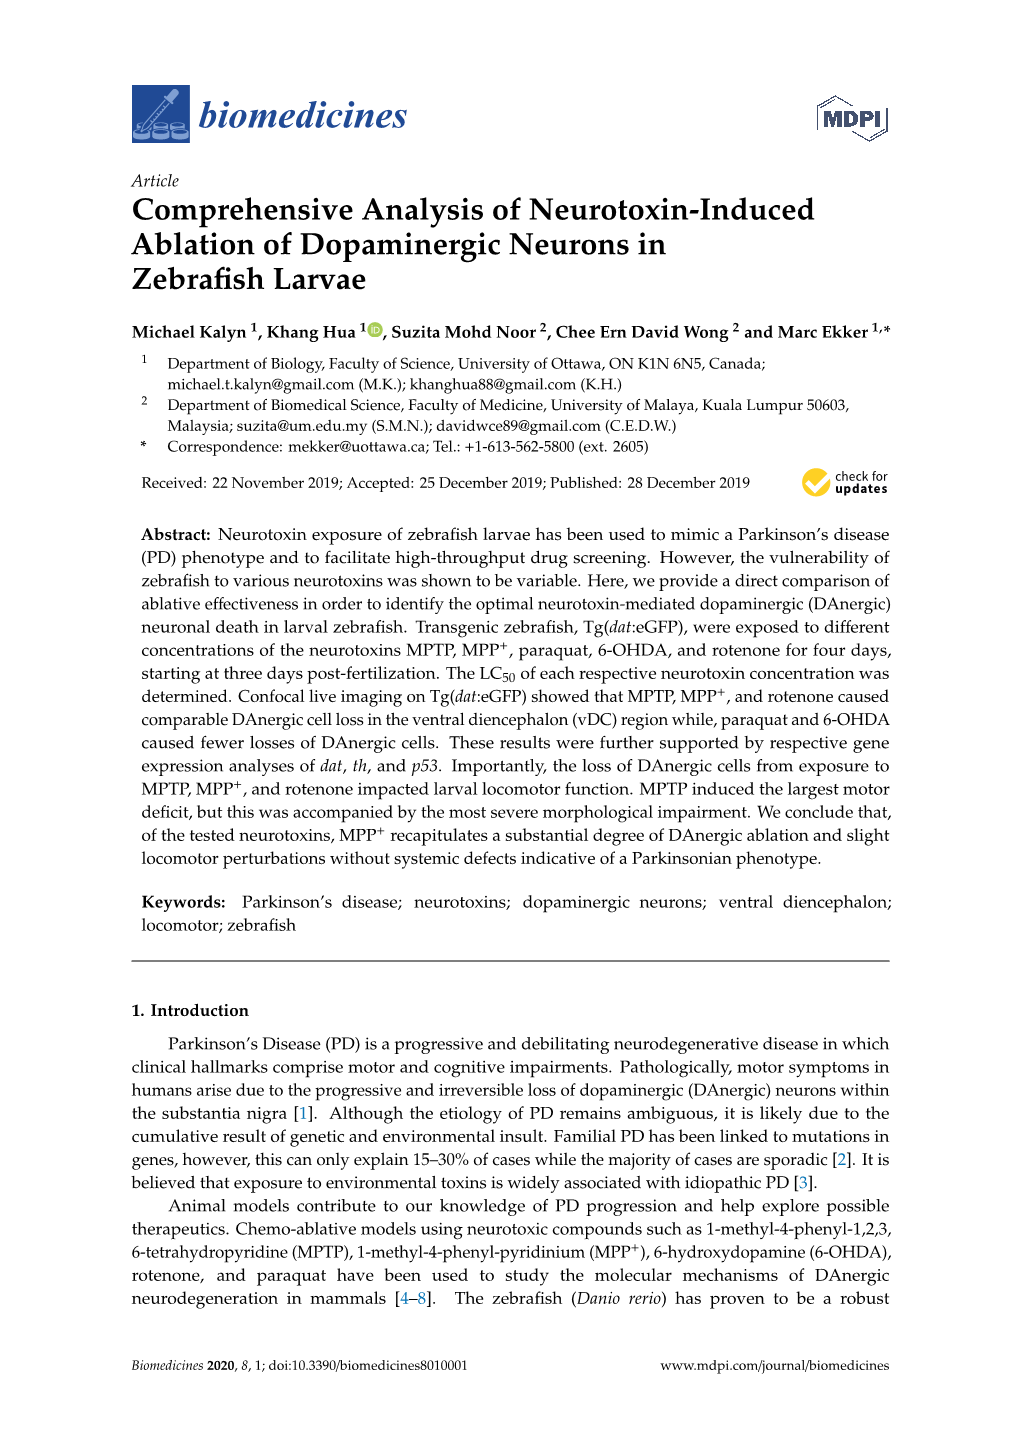 Comprehensive Analysis of Neurotoxin-Induced Ablation of Dopaminergic Neurons in Zebraﬁsh Larvae